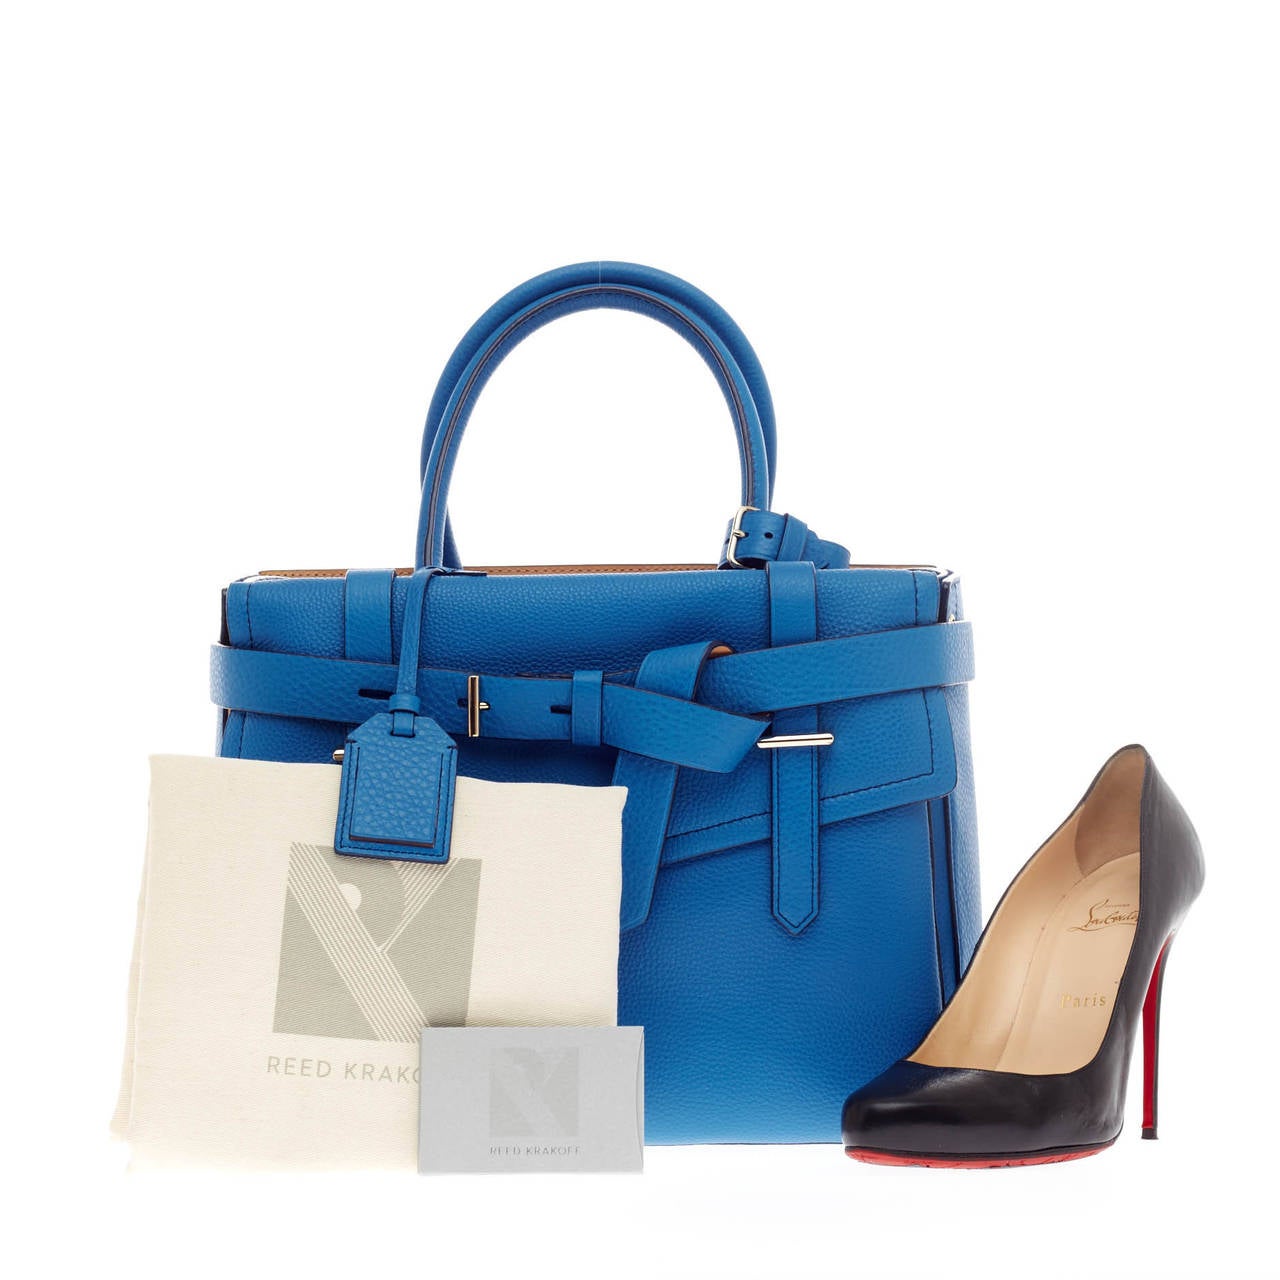 This authentic Reed Krakoff Boxer Tote Leather Medium is a versatile structured bag with an added pop of color for a playful twist. Constructed in striking caribbean blue leather, this functional tote features wrap-around leather buckle strap